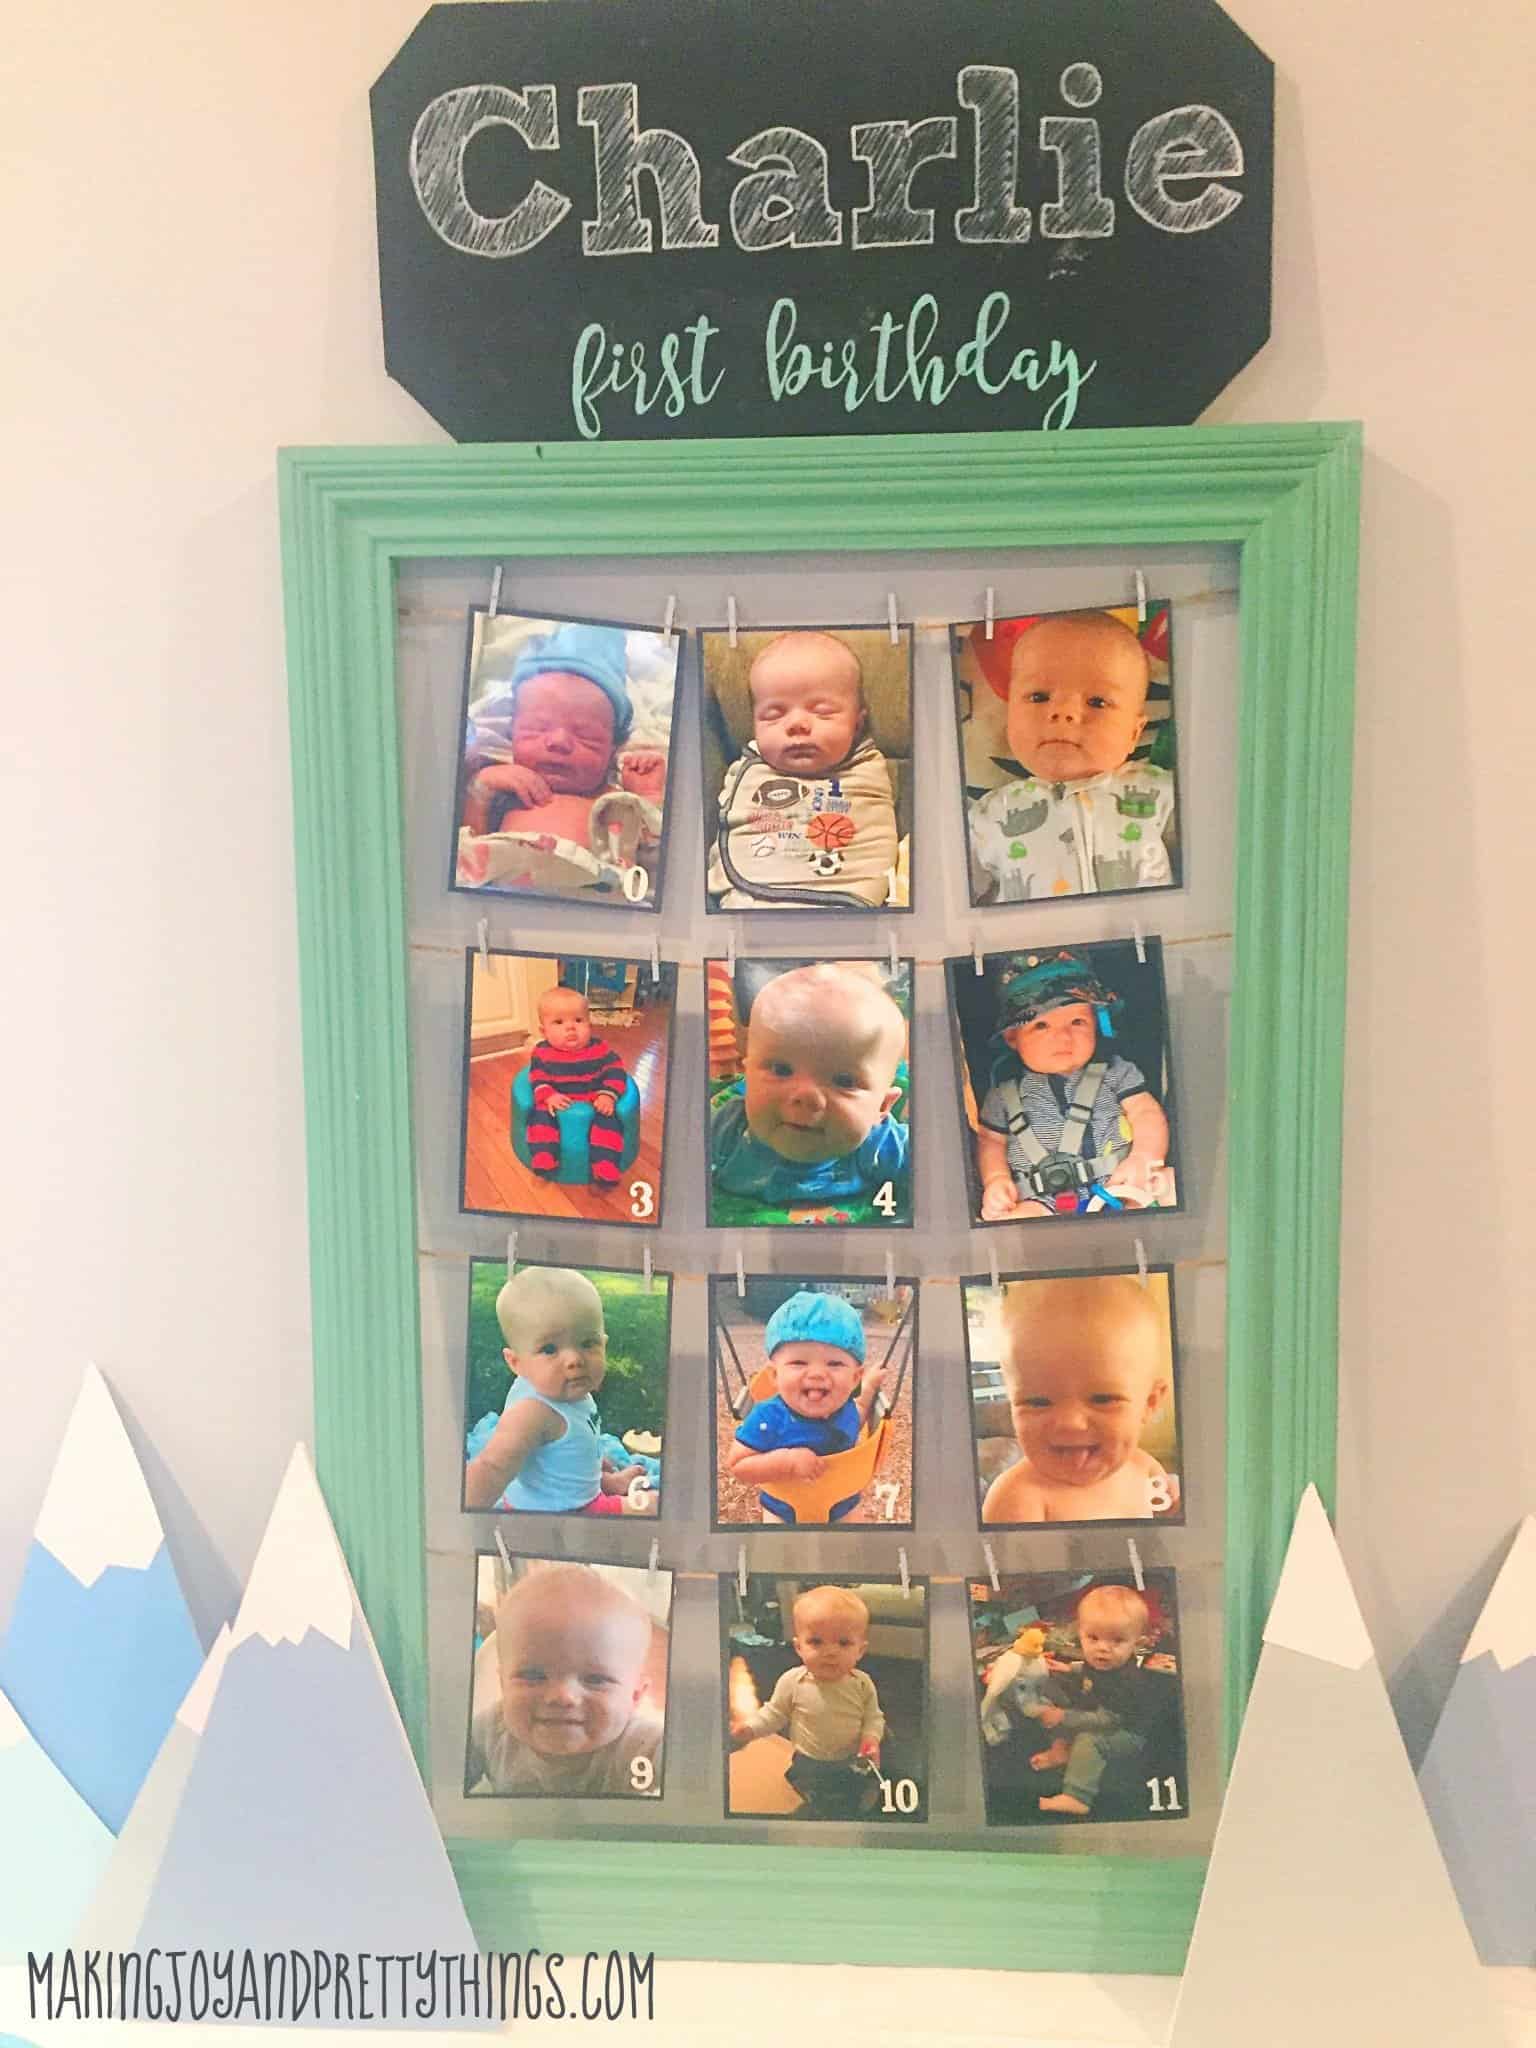 DIY Month by Month picture display. Perfect for 1st birthday parties. Easy DIY craft for birthday party decor!